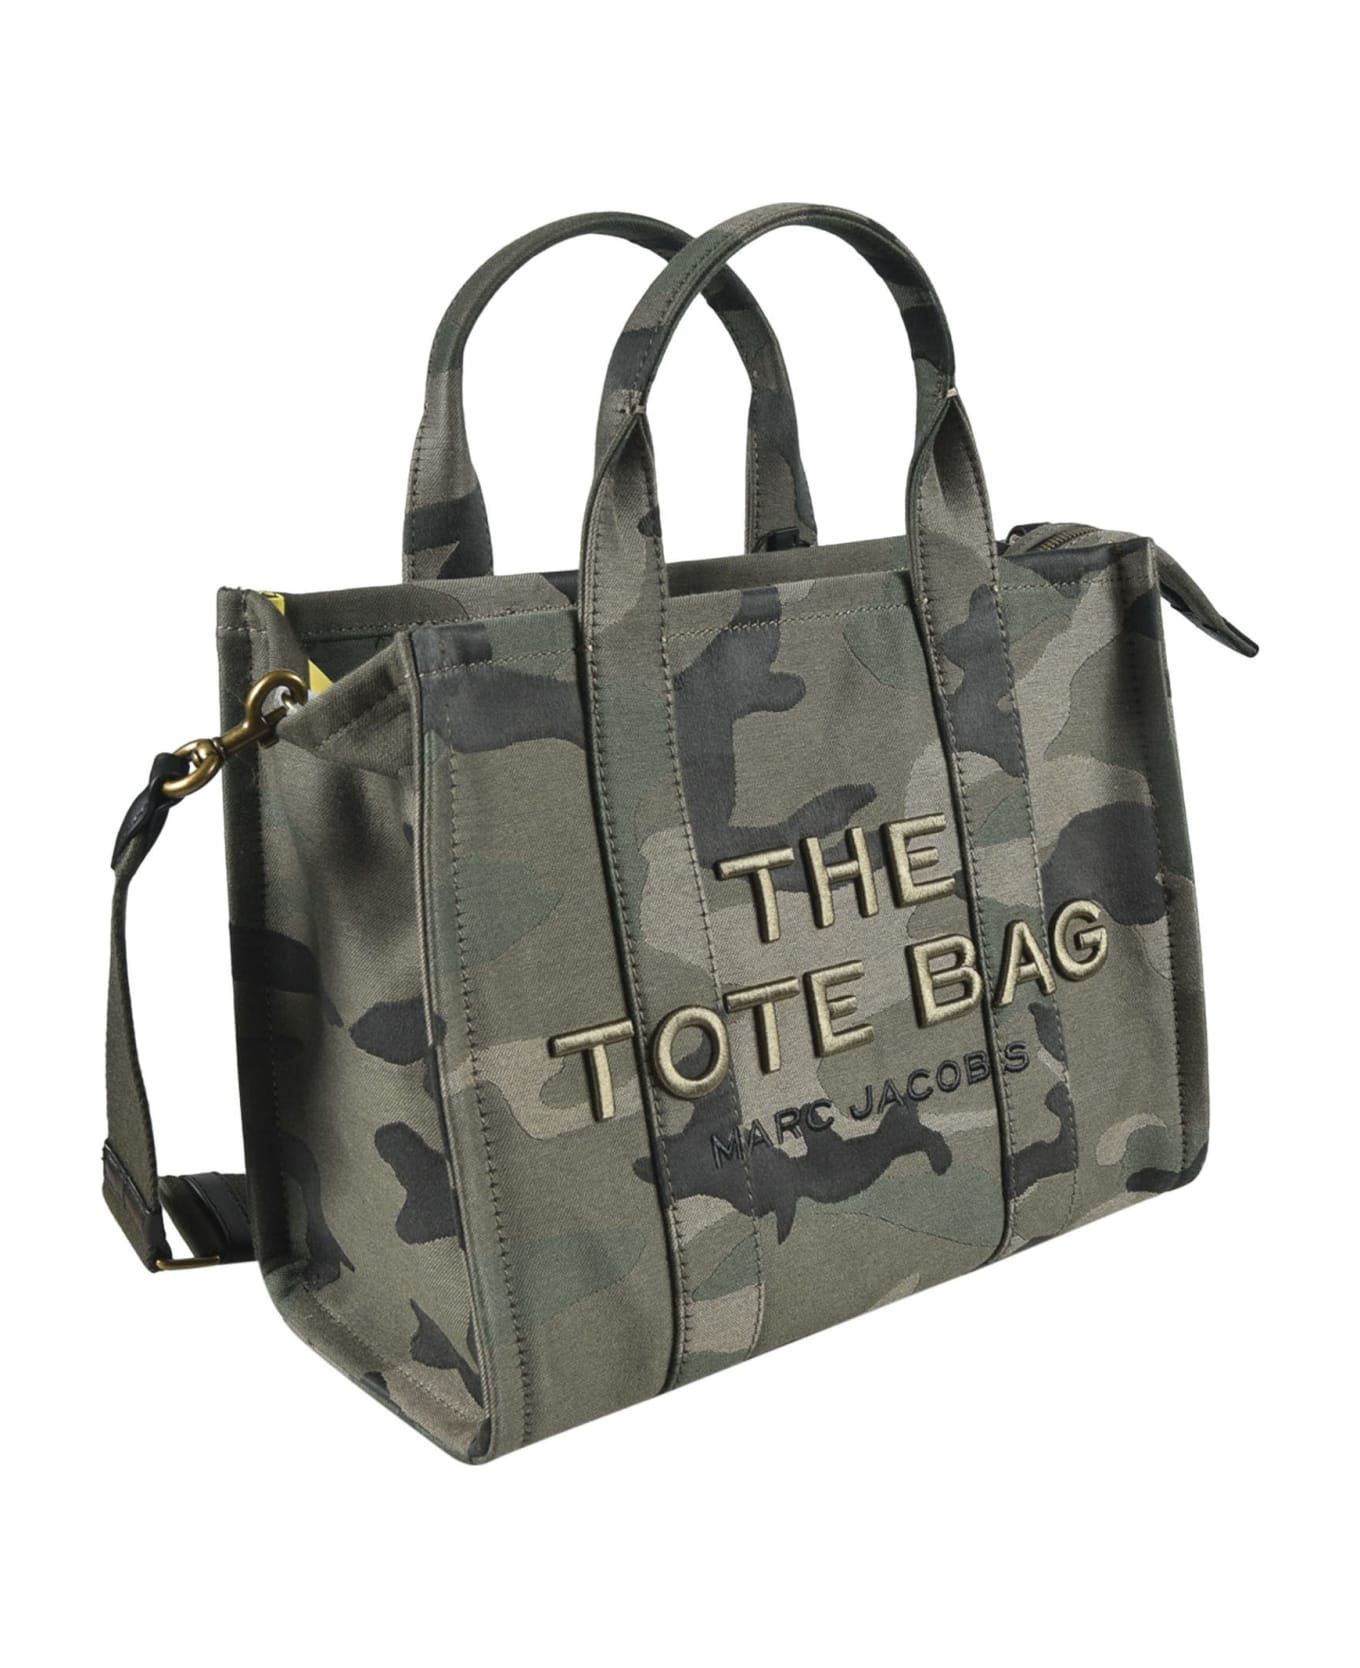 Marc Jacobs The Tote Bag Patched Tote - Camo/Multicolor